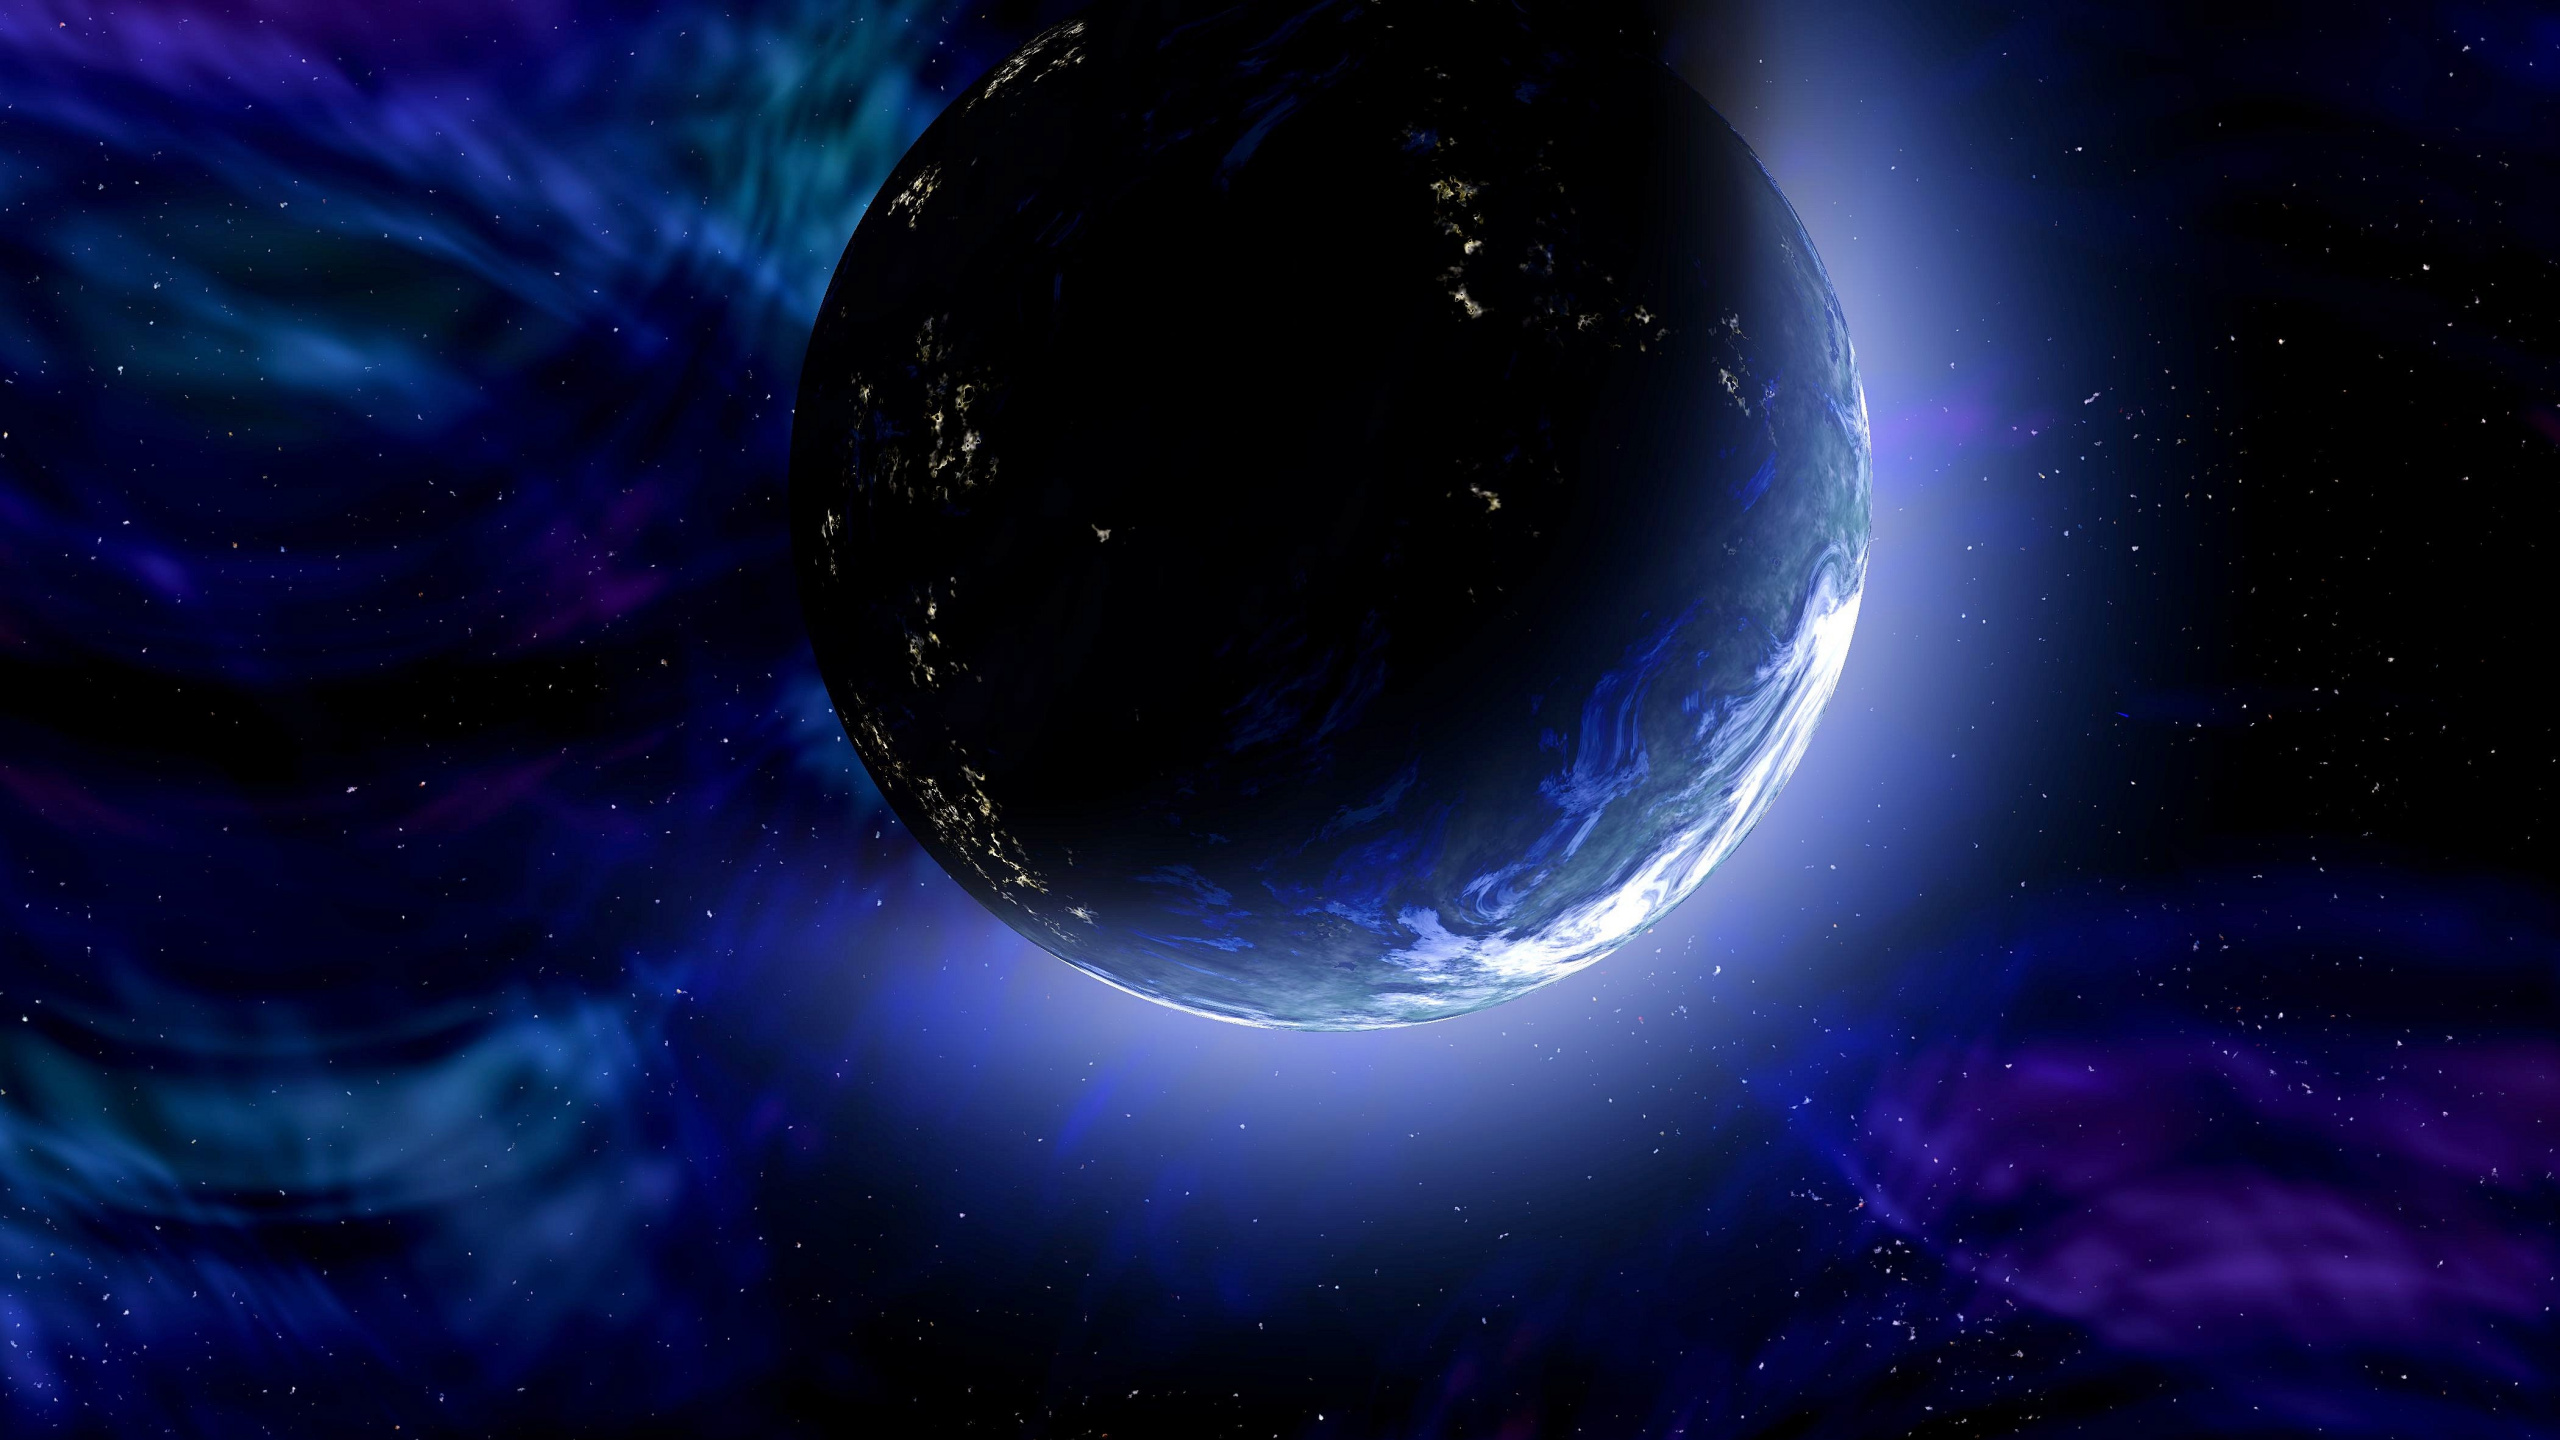 Blue and White Planet Painting. Wallpaper in 2560x1440 Resolution